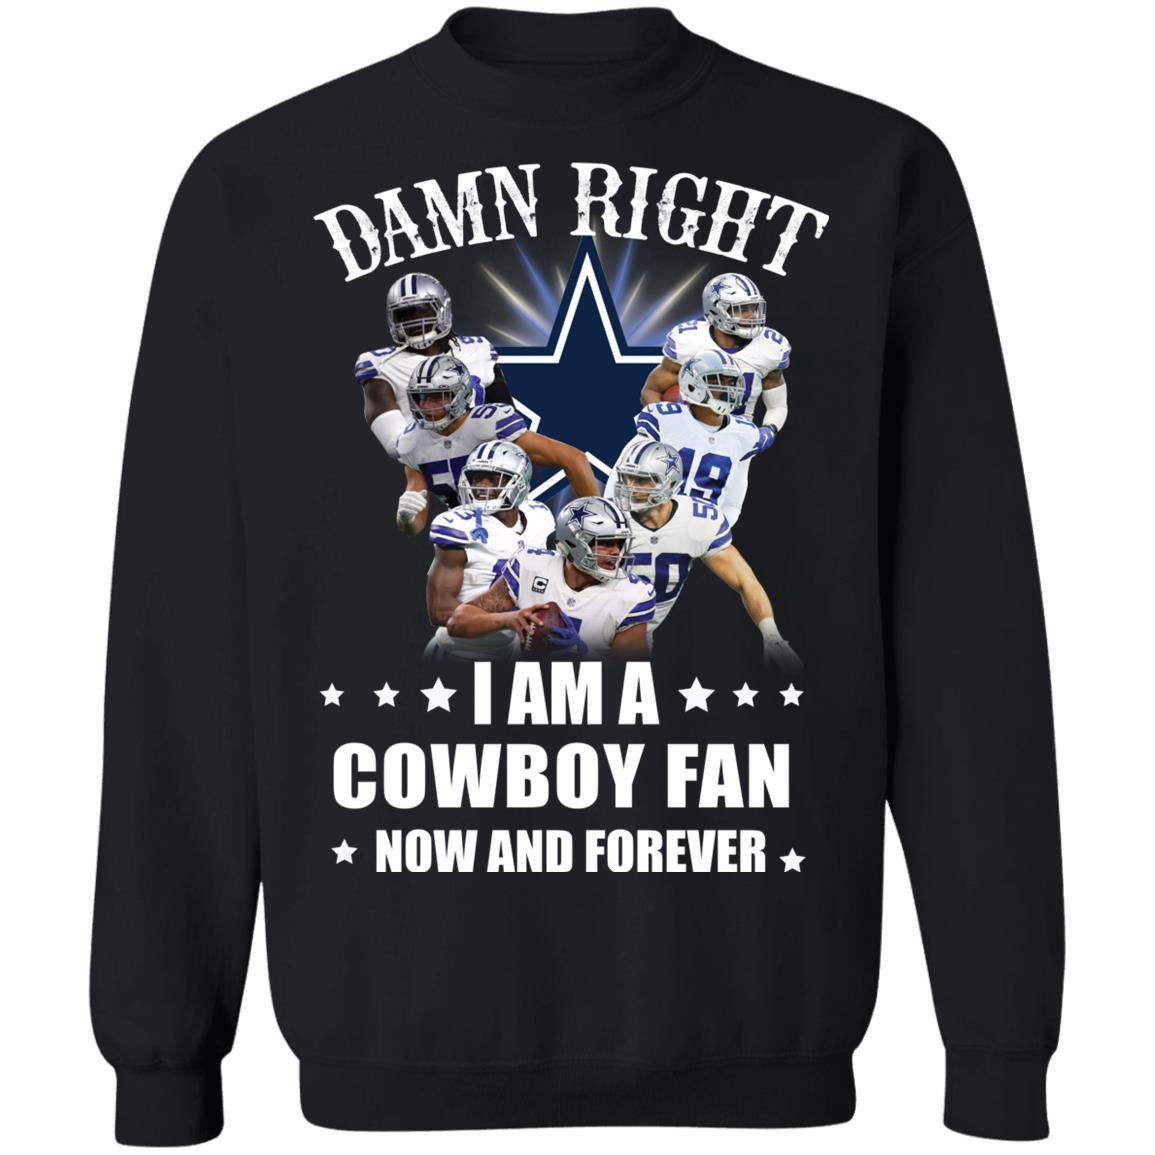 Damn right I am a Cowboy fan now and forever shirt - Rockatee